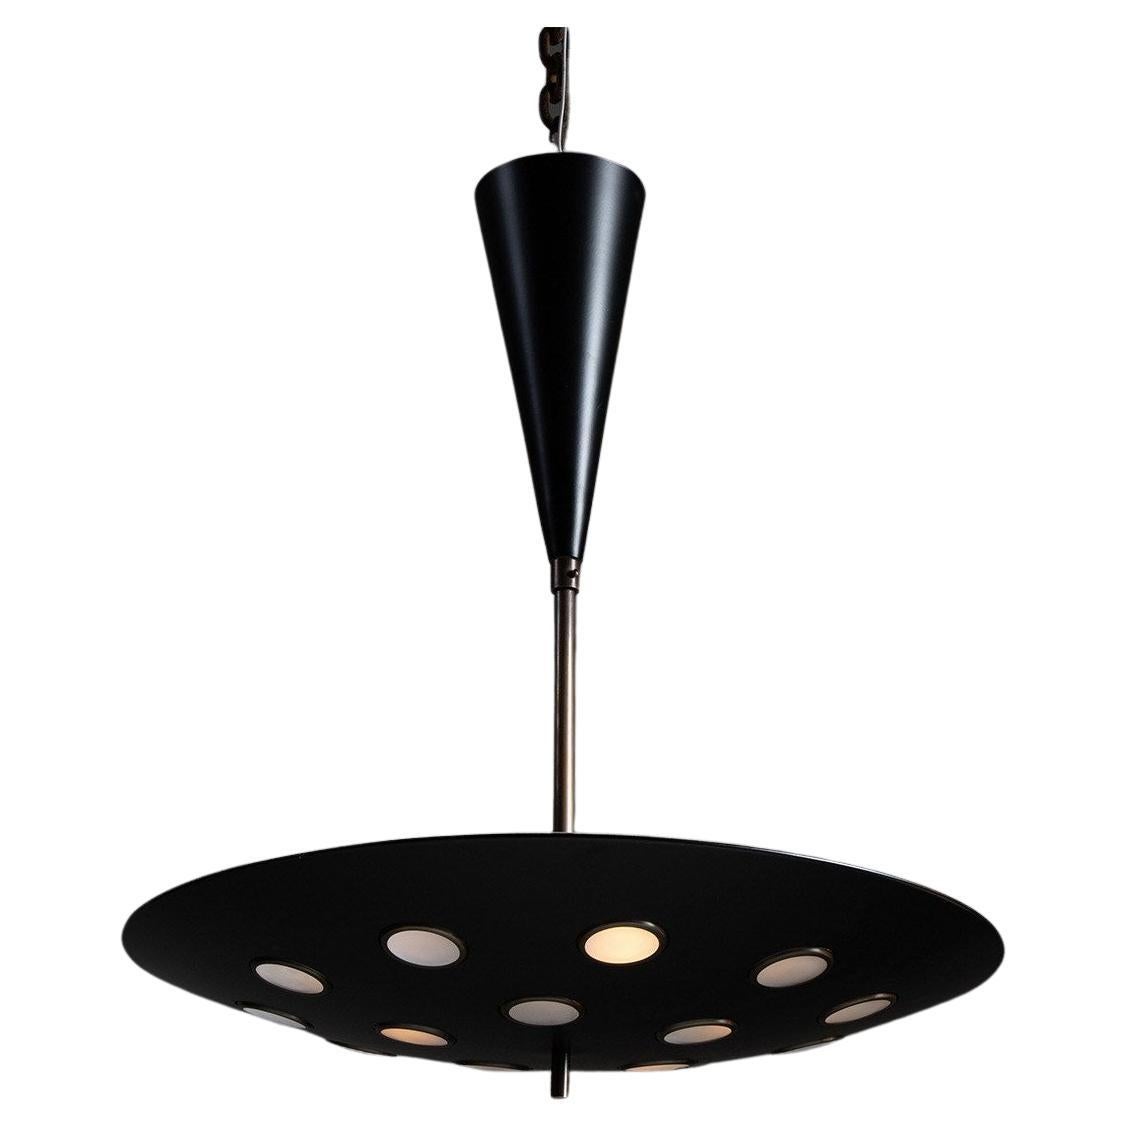 Black Cutout Chandelier, Made in Italy